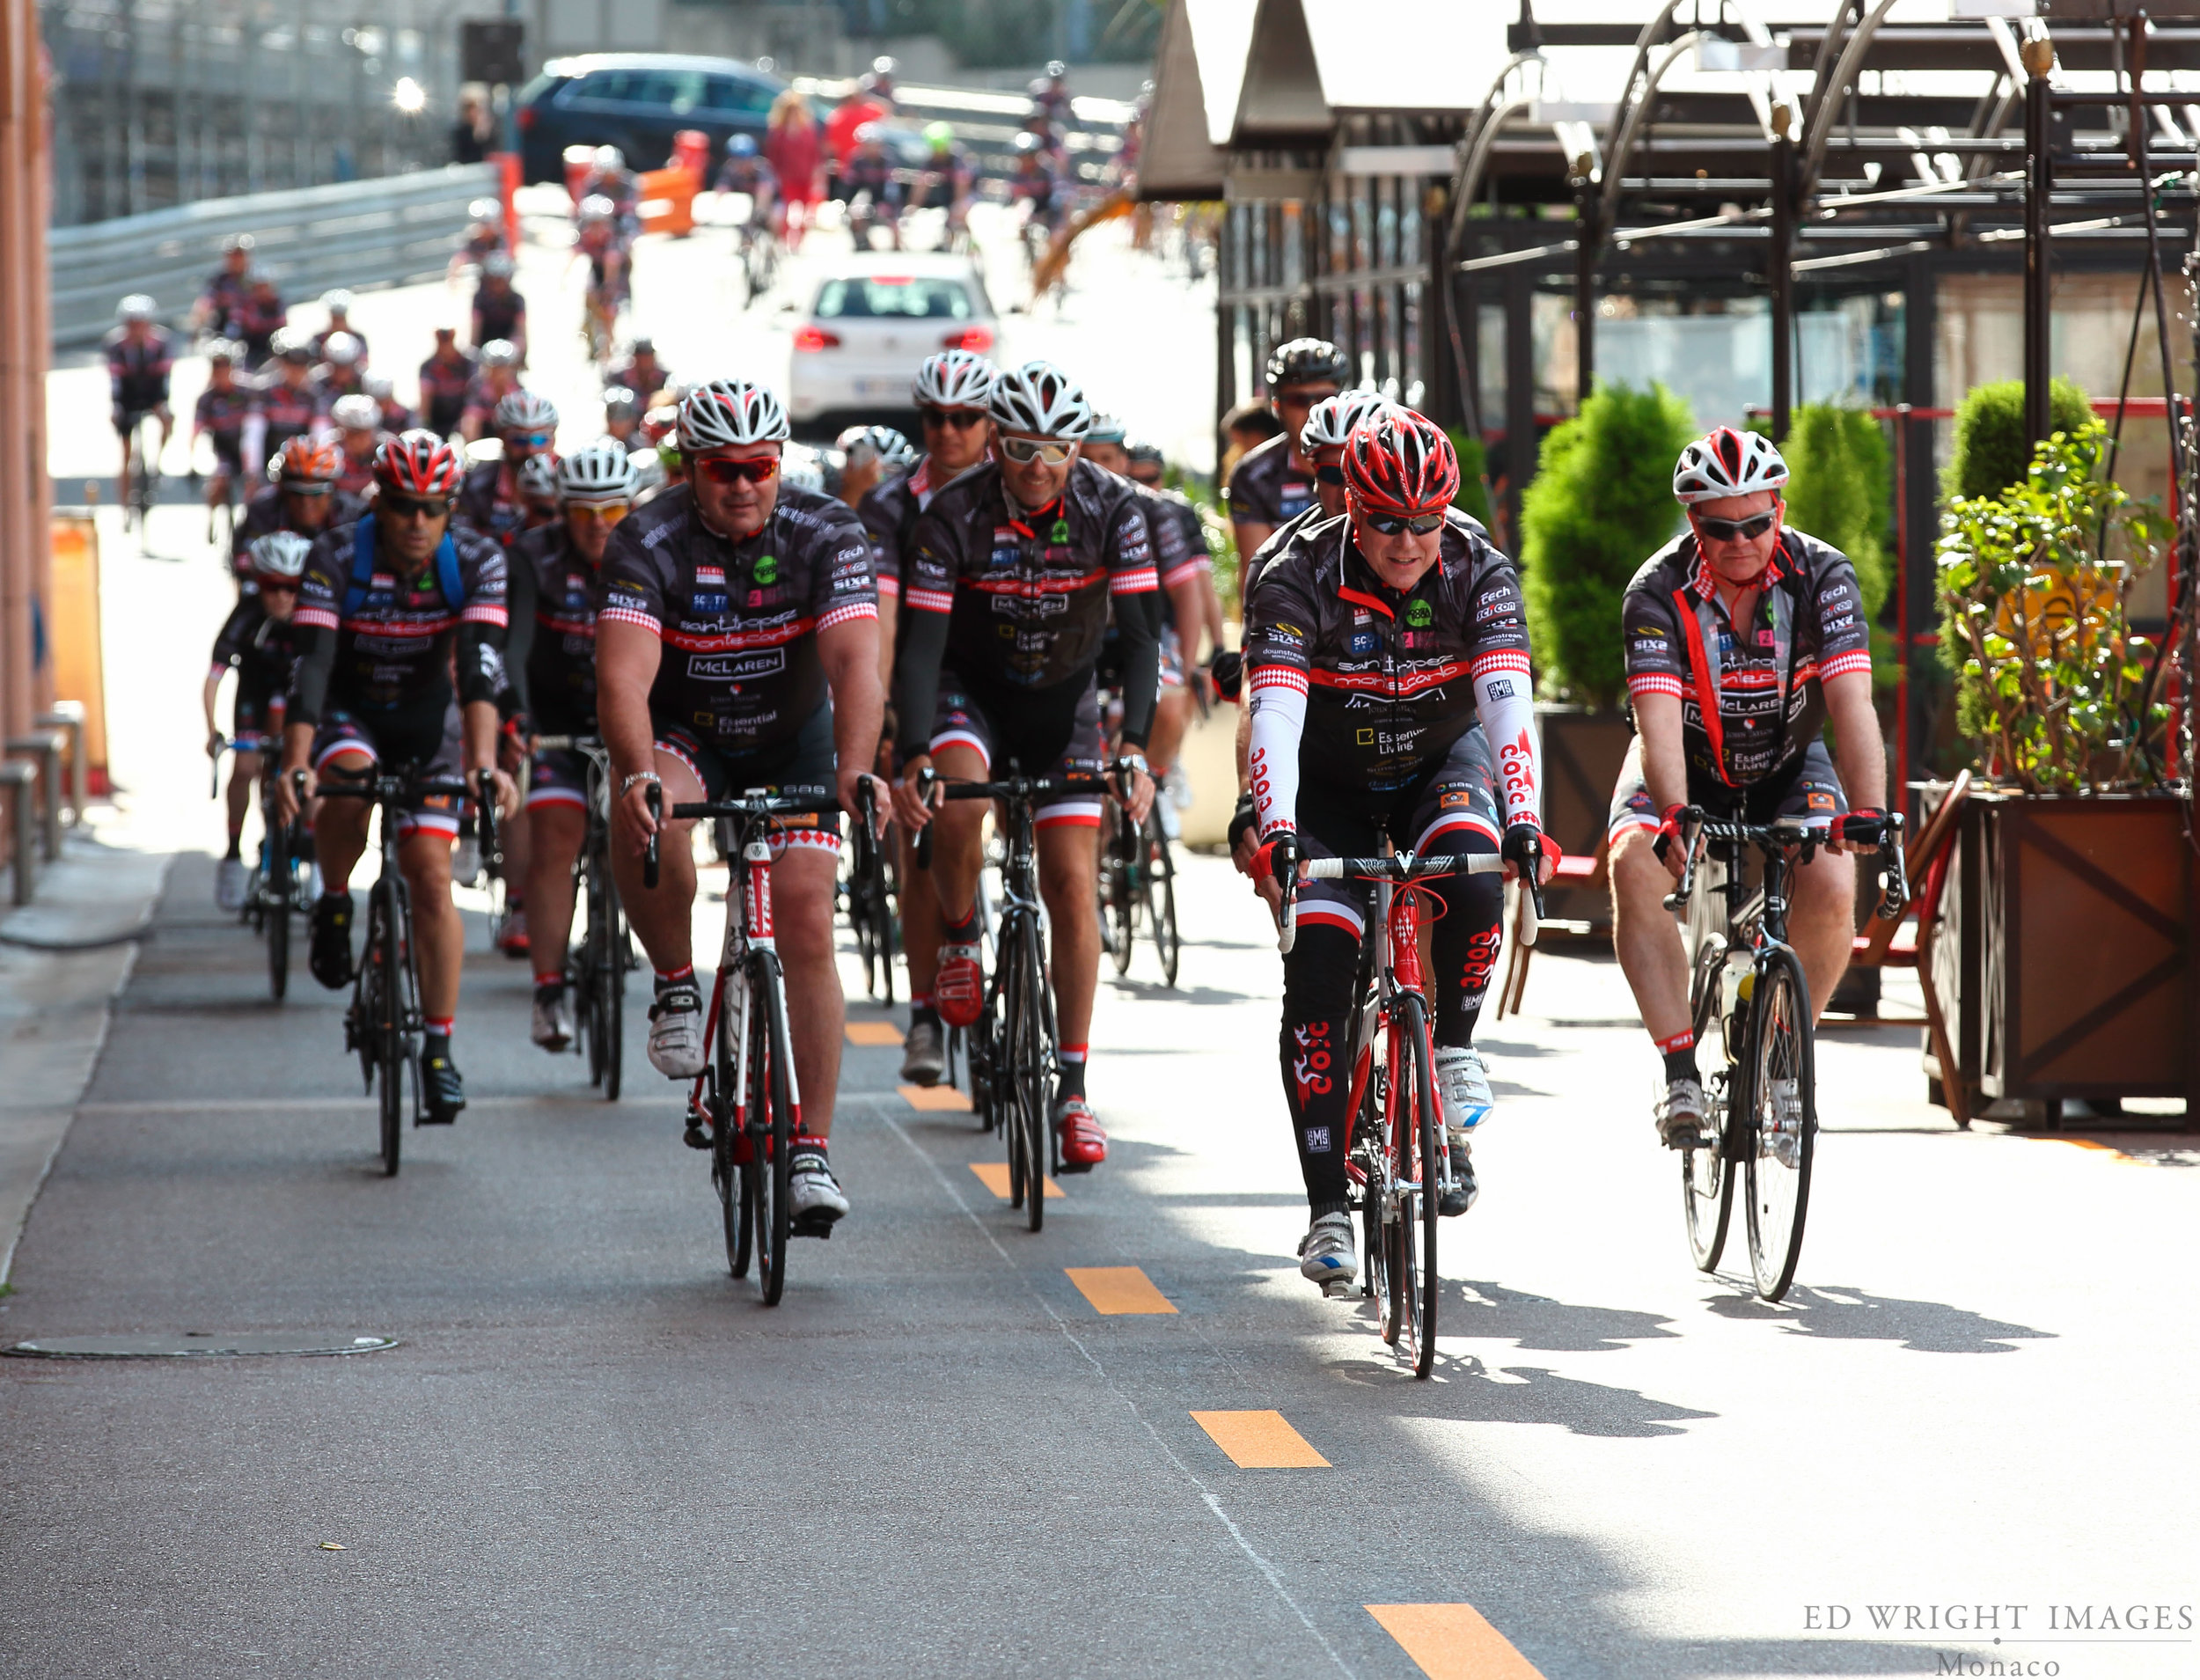  The Champagne &amp; Oyster Cycling Club of Monaco   Great cause    Find out more  